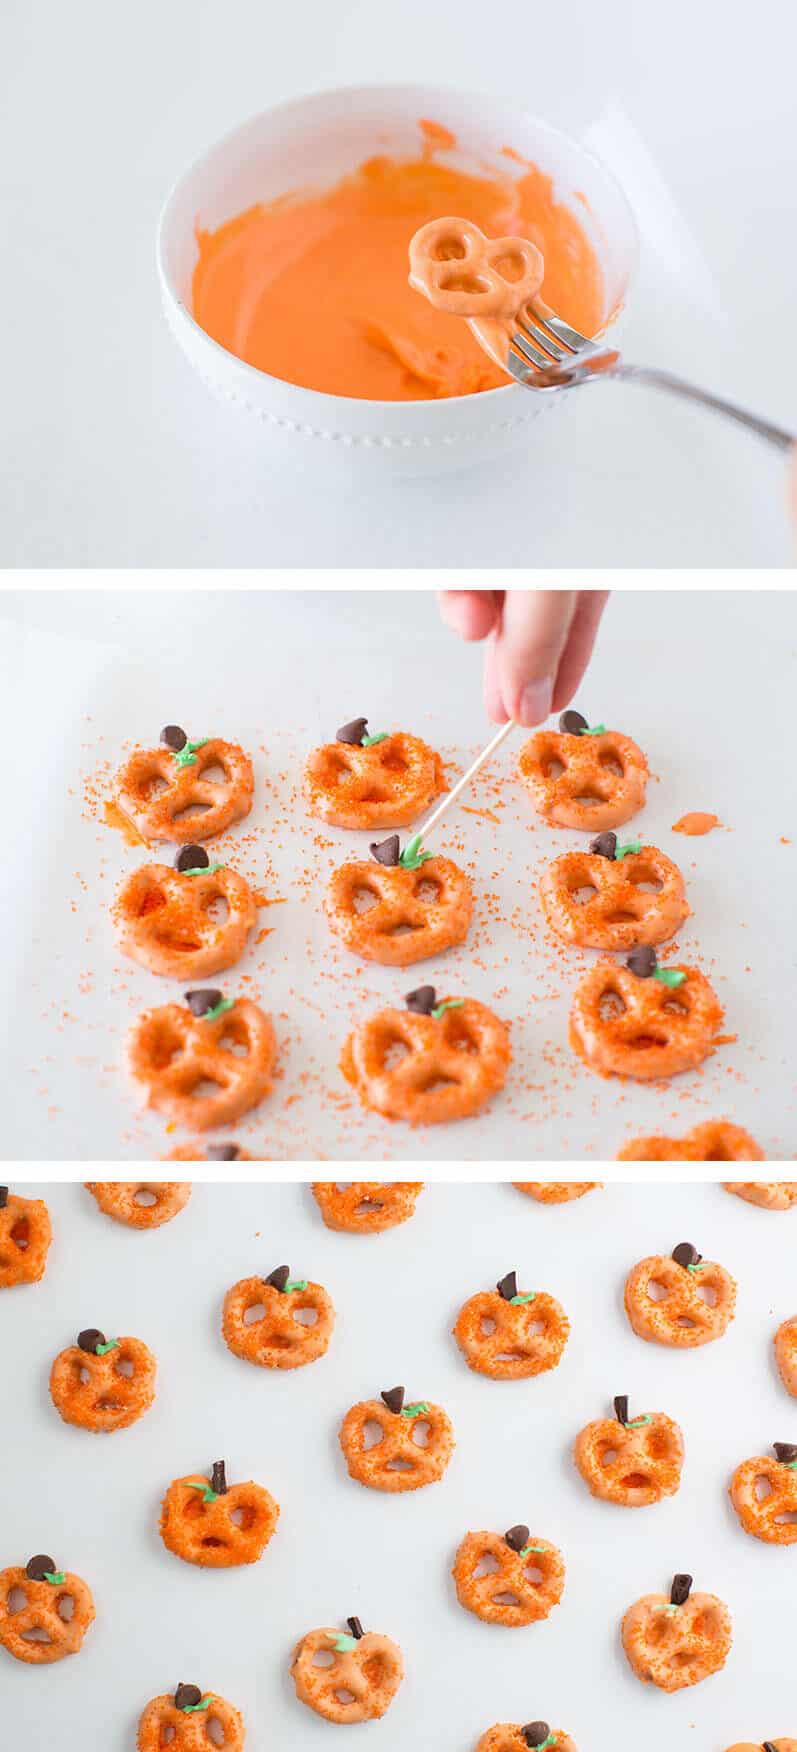 Quick, easy, and delicious Chocolate Covered Pretzel Pumpkins make the perfect family-friendly project and snack!